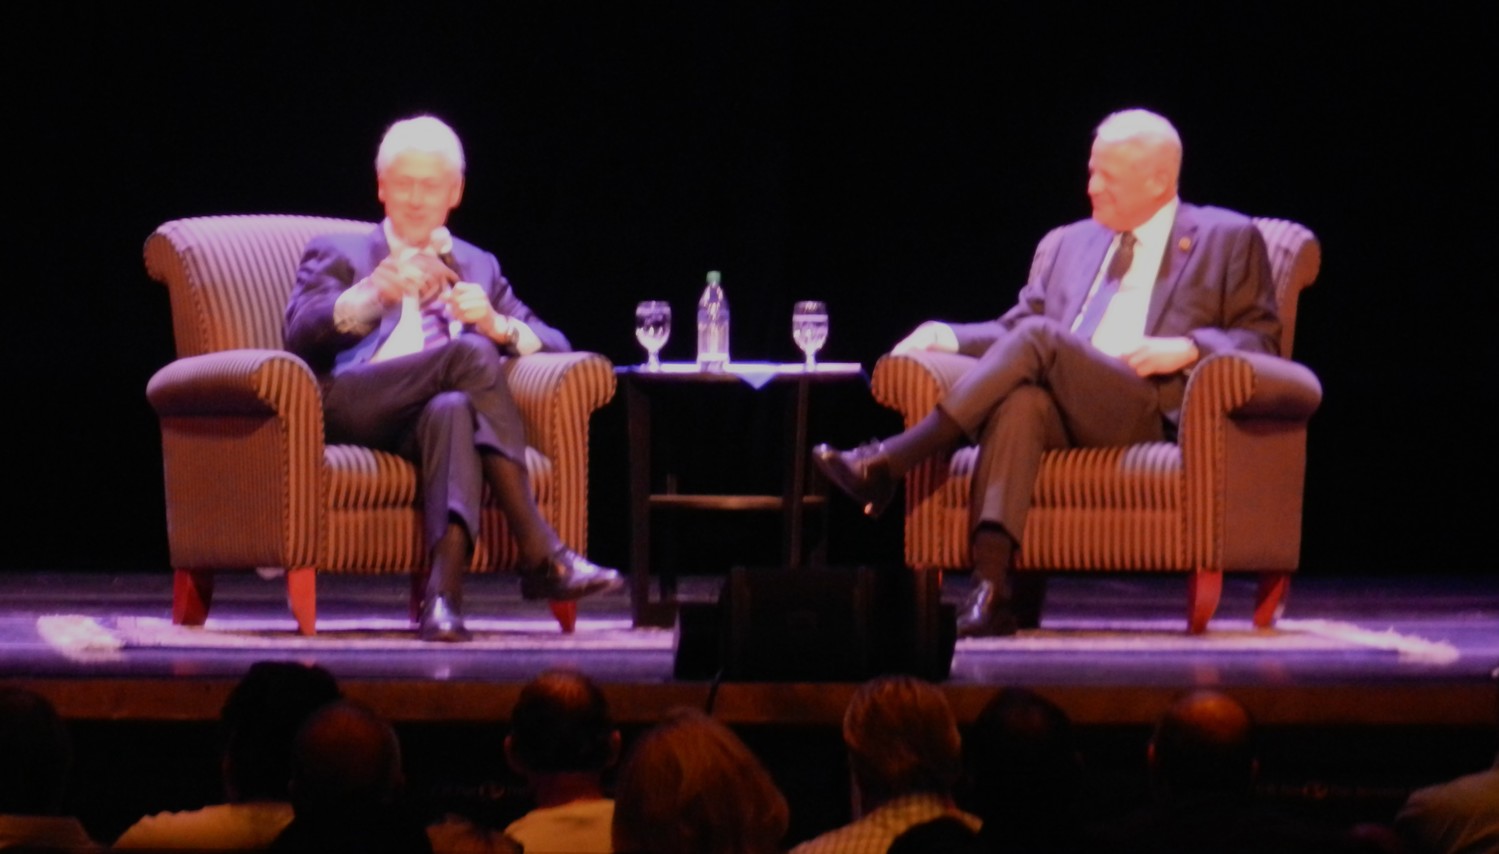 Former President Bill Clinton spoke with former Rep. Steve Israel at a Global Institute event on Oct. 5 at LIU.